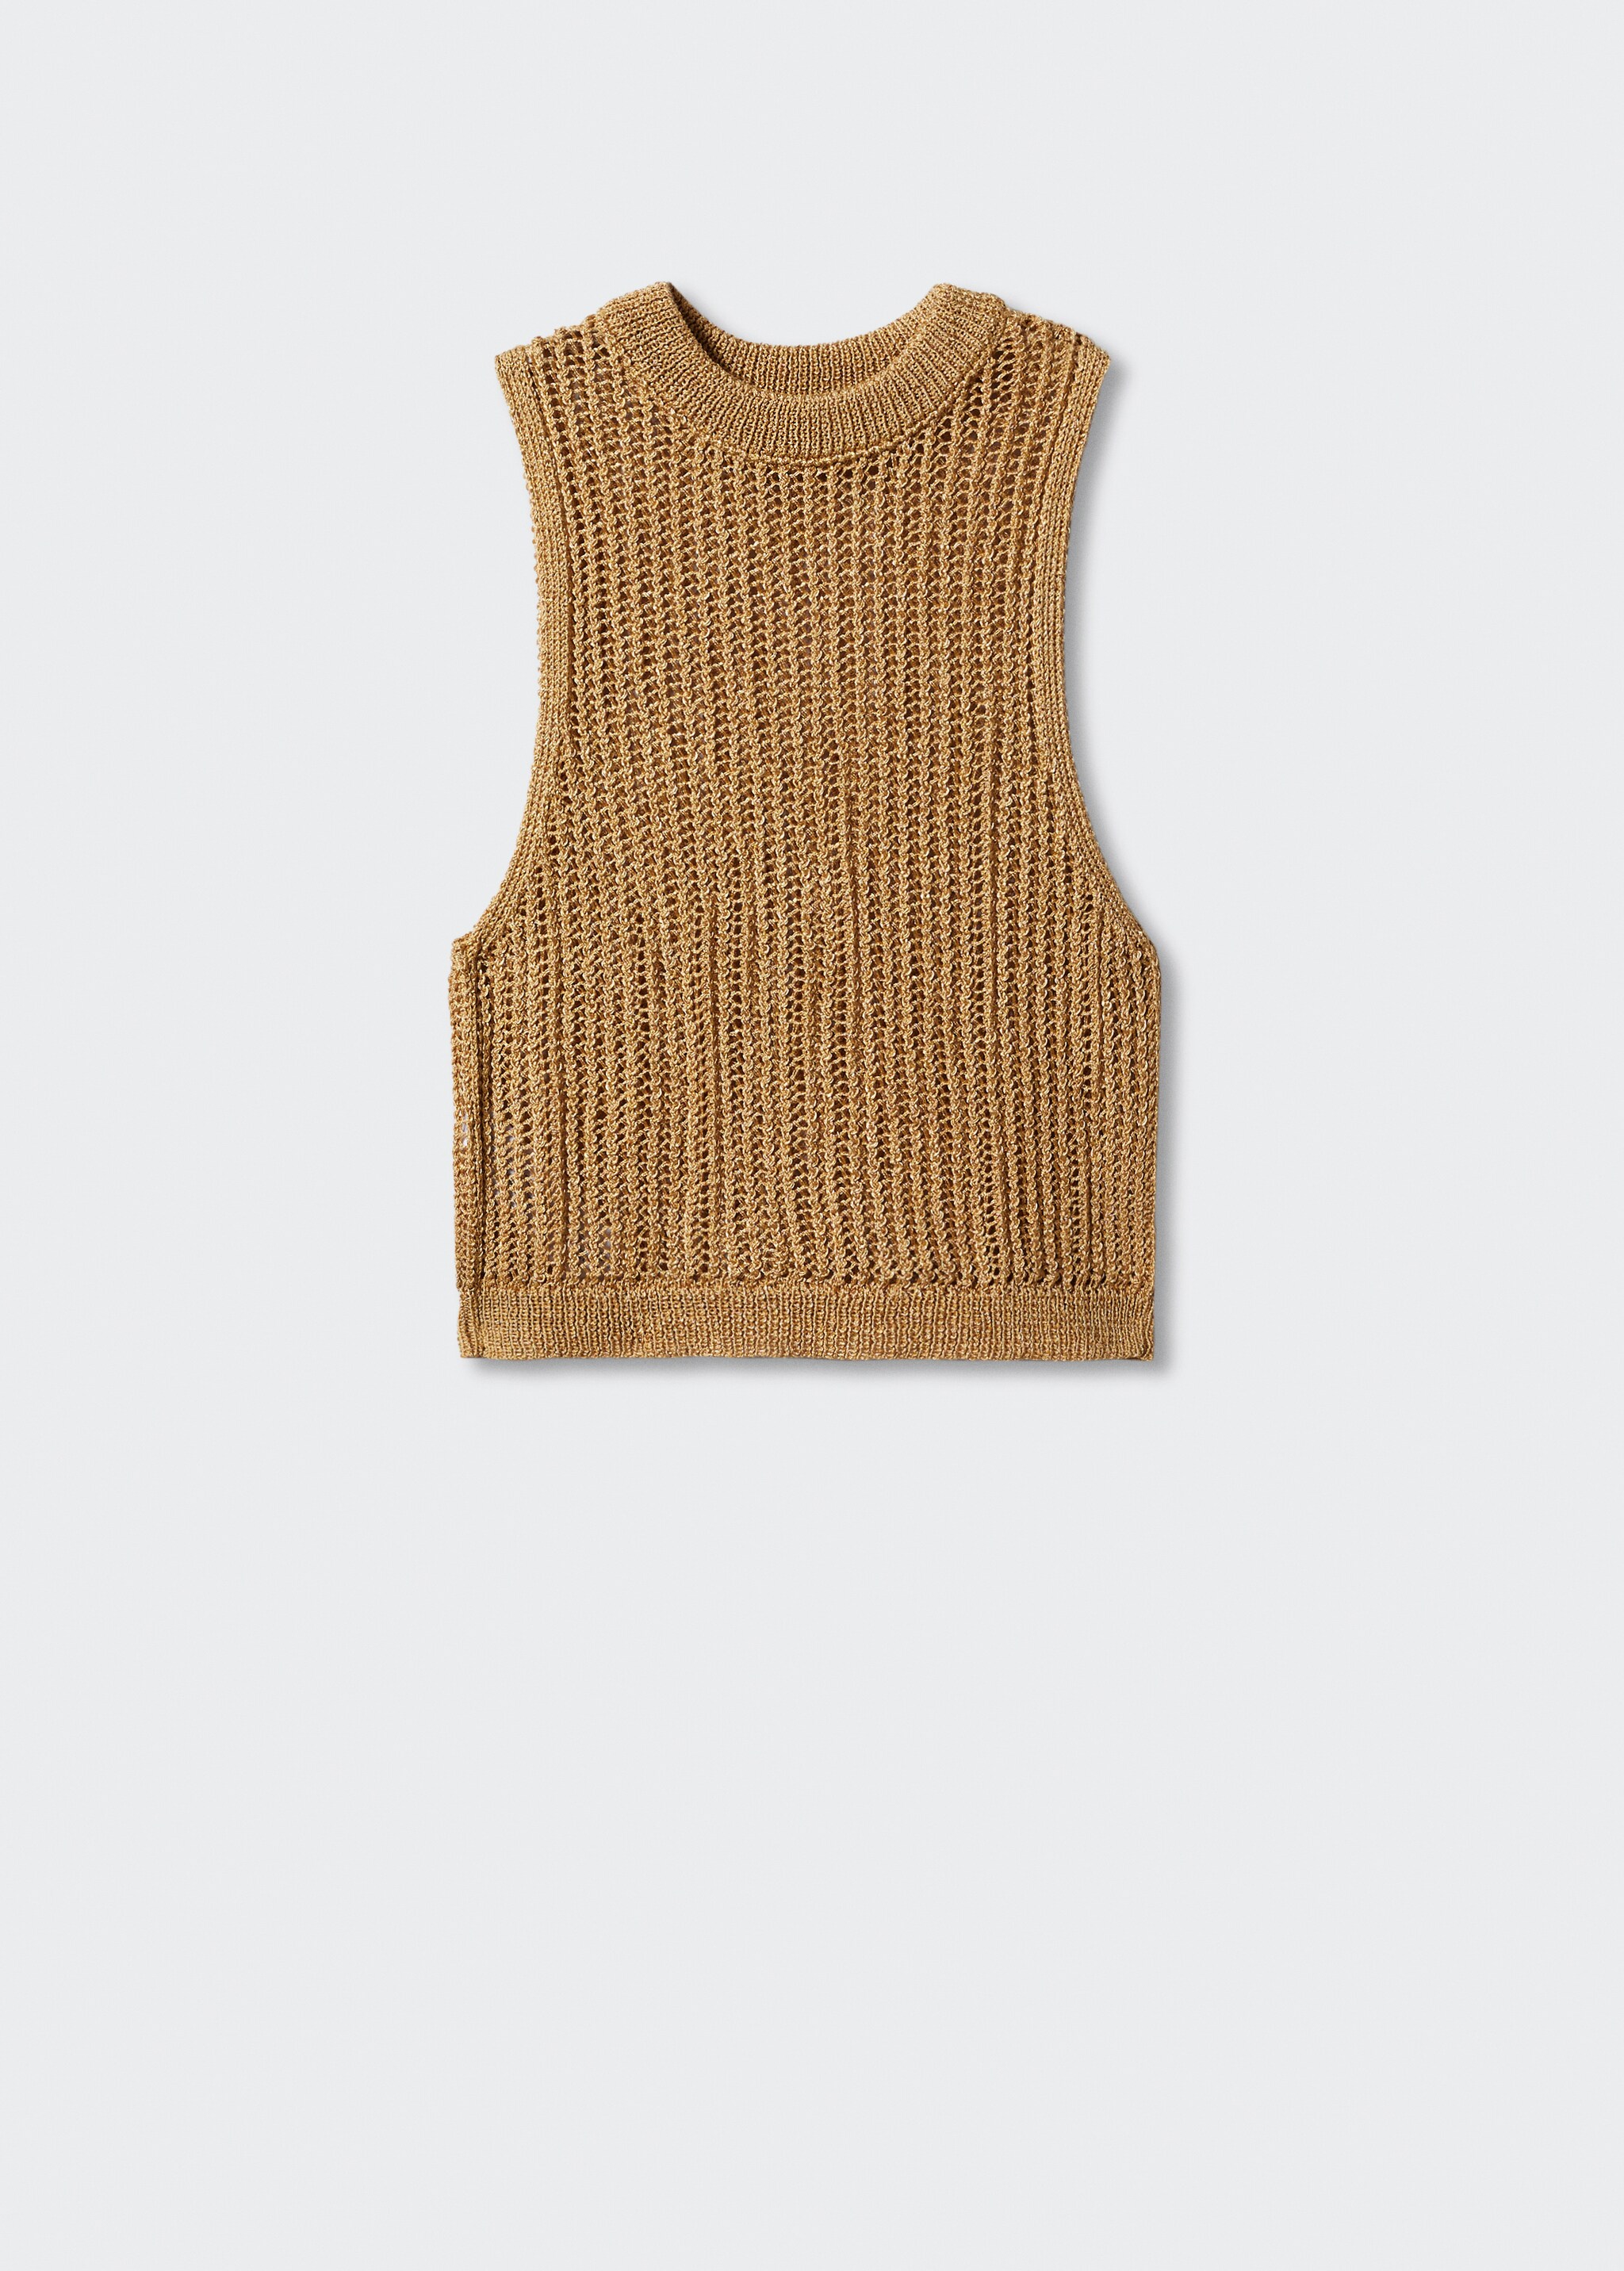 Perkins-neck knitted top - Article without model